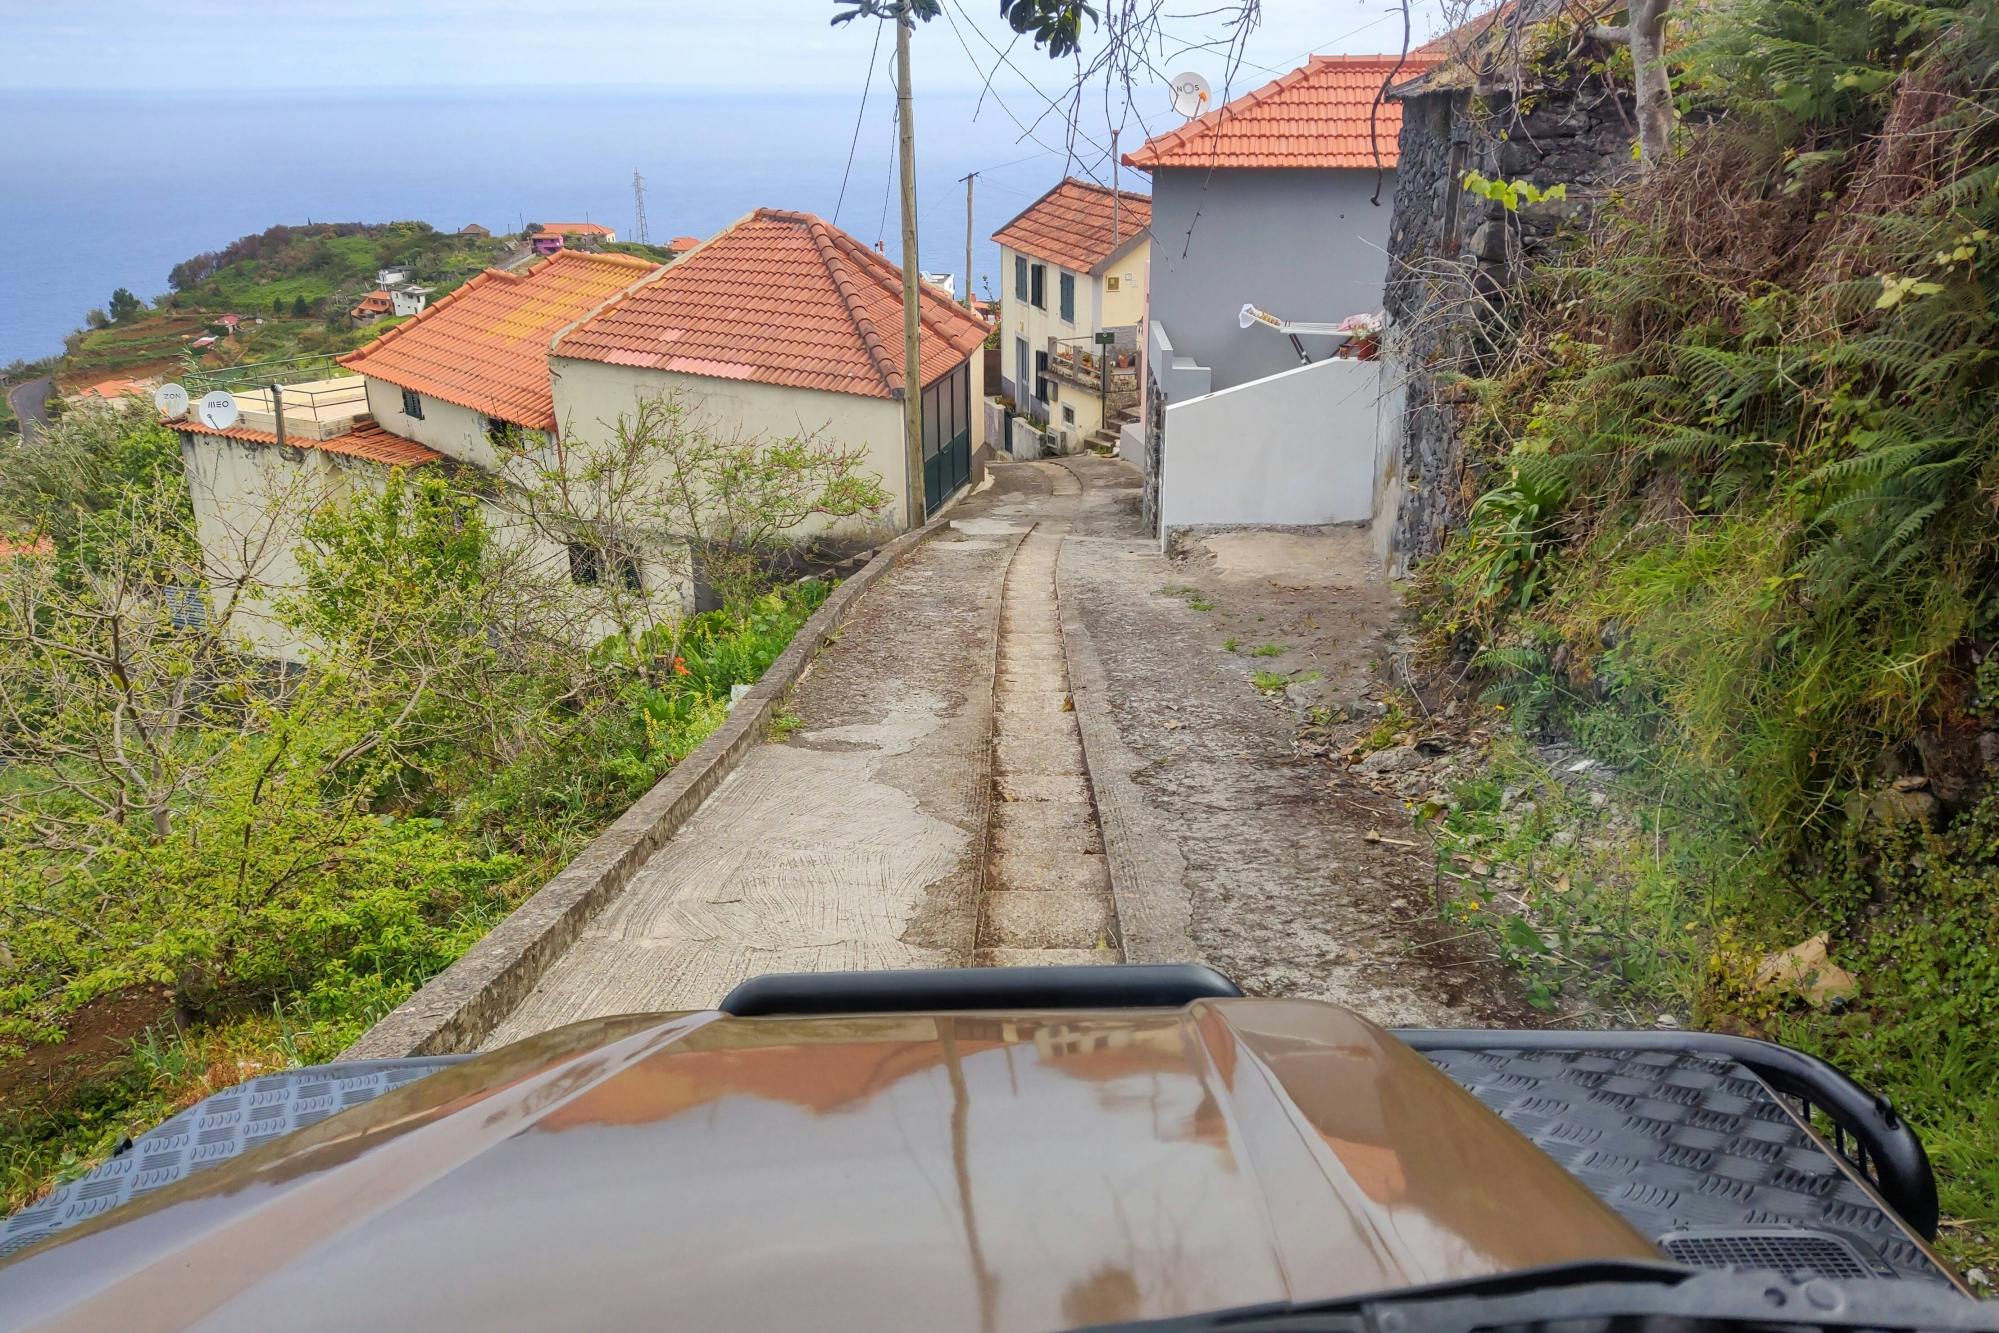 Northwest Madeira 4x4 Tour with Laurisilva Forest and Lunch